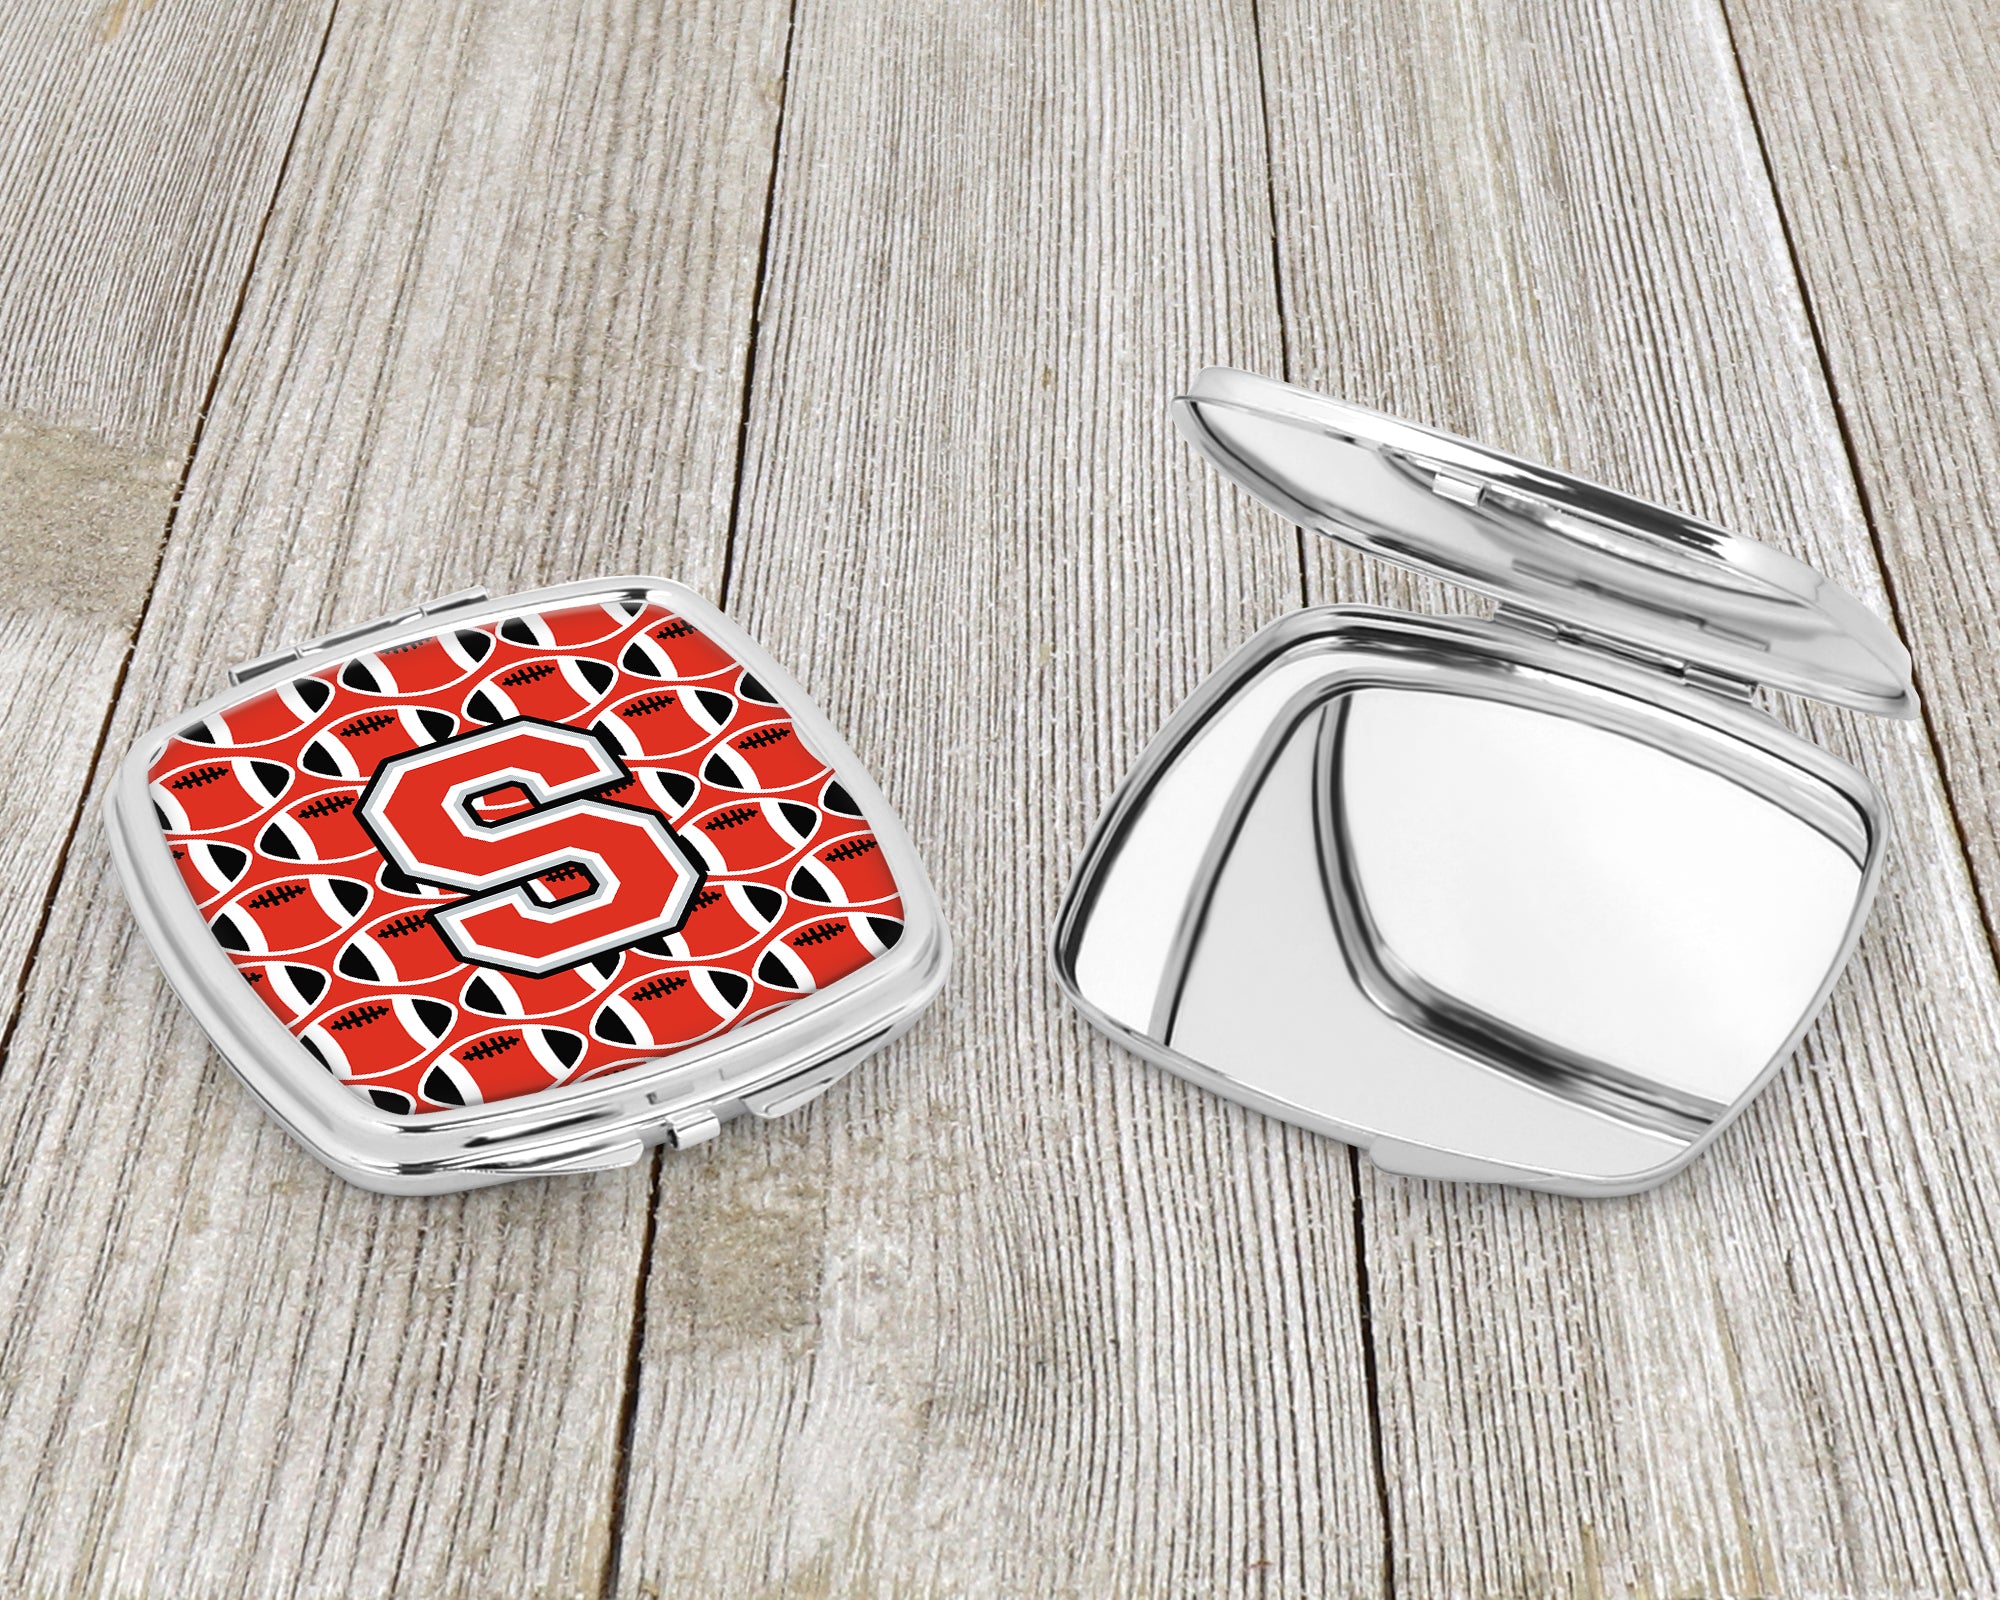 Letter S Football Scarlet and Grey Compact Mirror CJ1067-SSCM